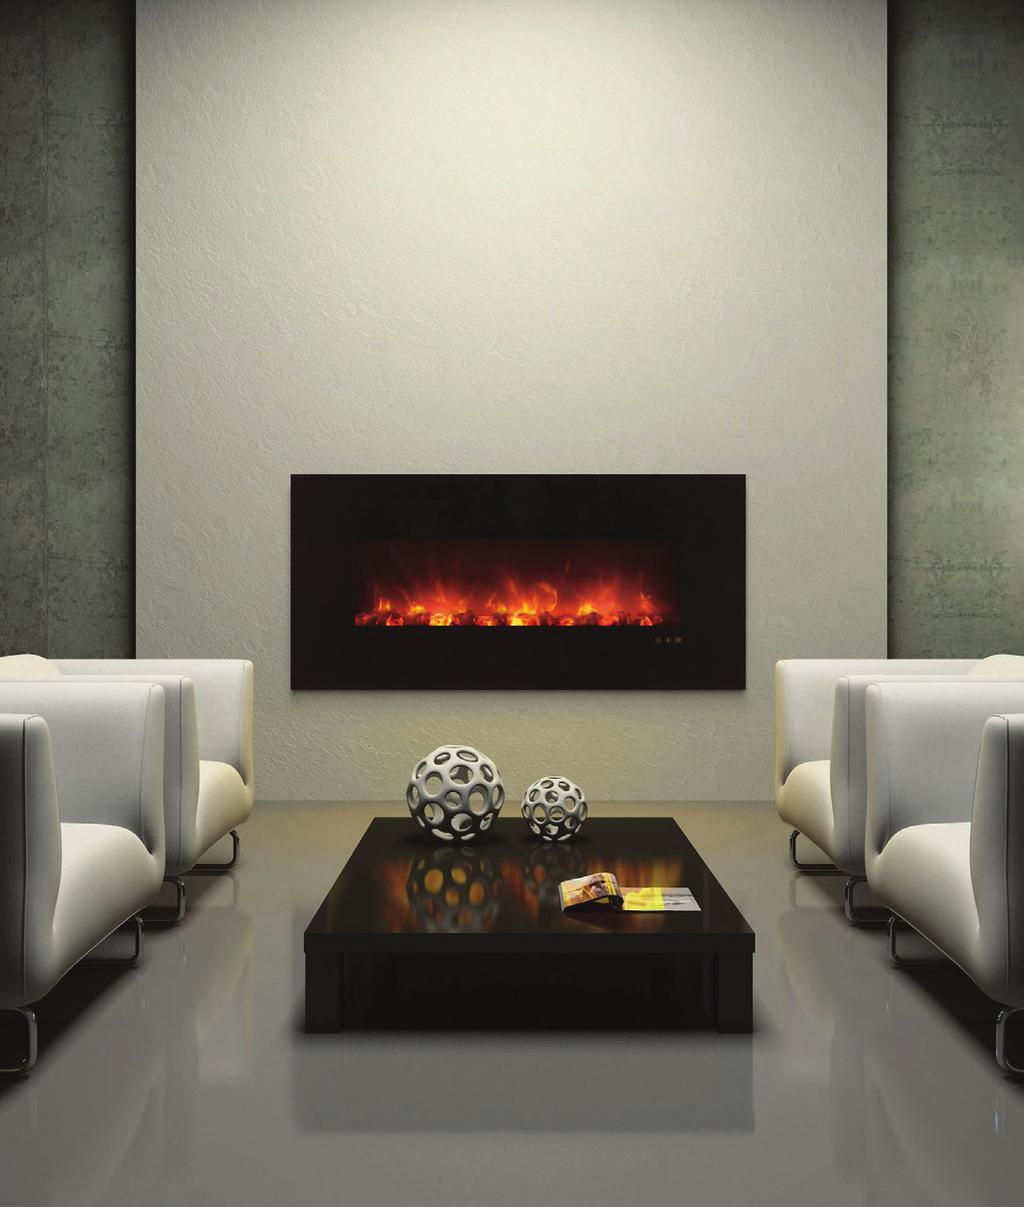 With an unsurpassed realistic flame pattern, these models are packed with features including recessed or wall mount installation, LED